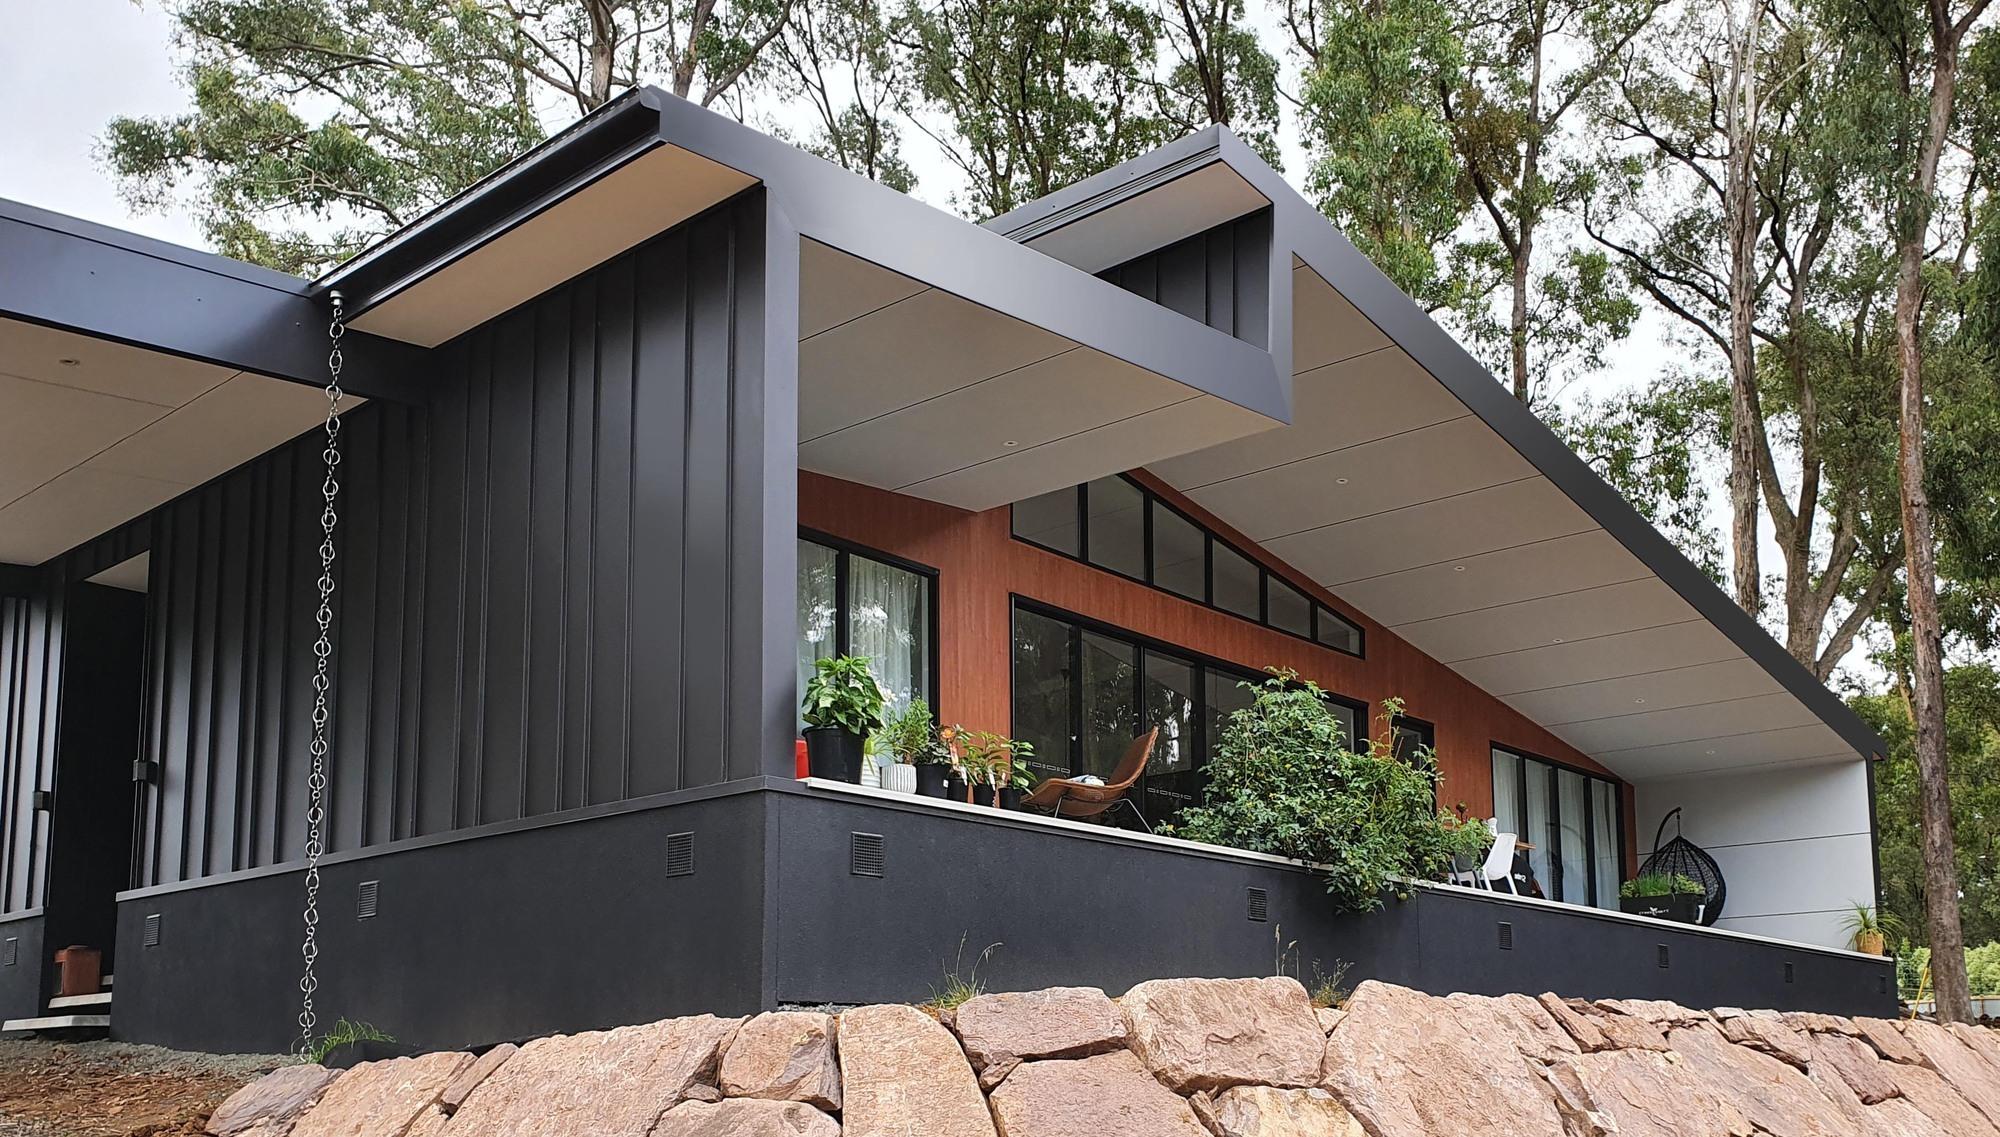 Samantha from Cockatoo, VIC loves COLORBOND® steel. Roofing, Guttering & Fascia, Garage Doors, Walling, Sheds made from COLORBOND® steel in colours Basalt®, Monument® and Monument® Matt